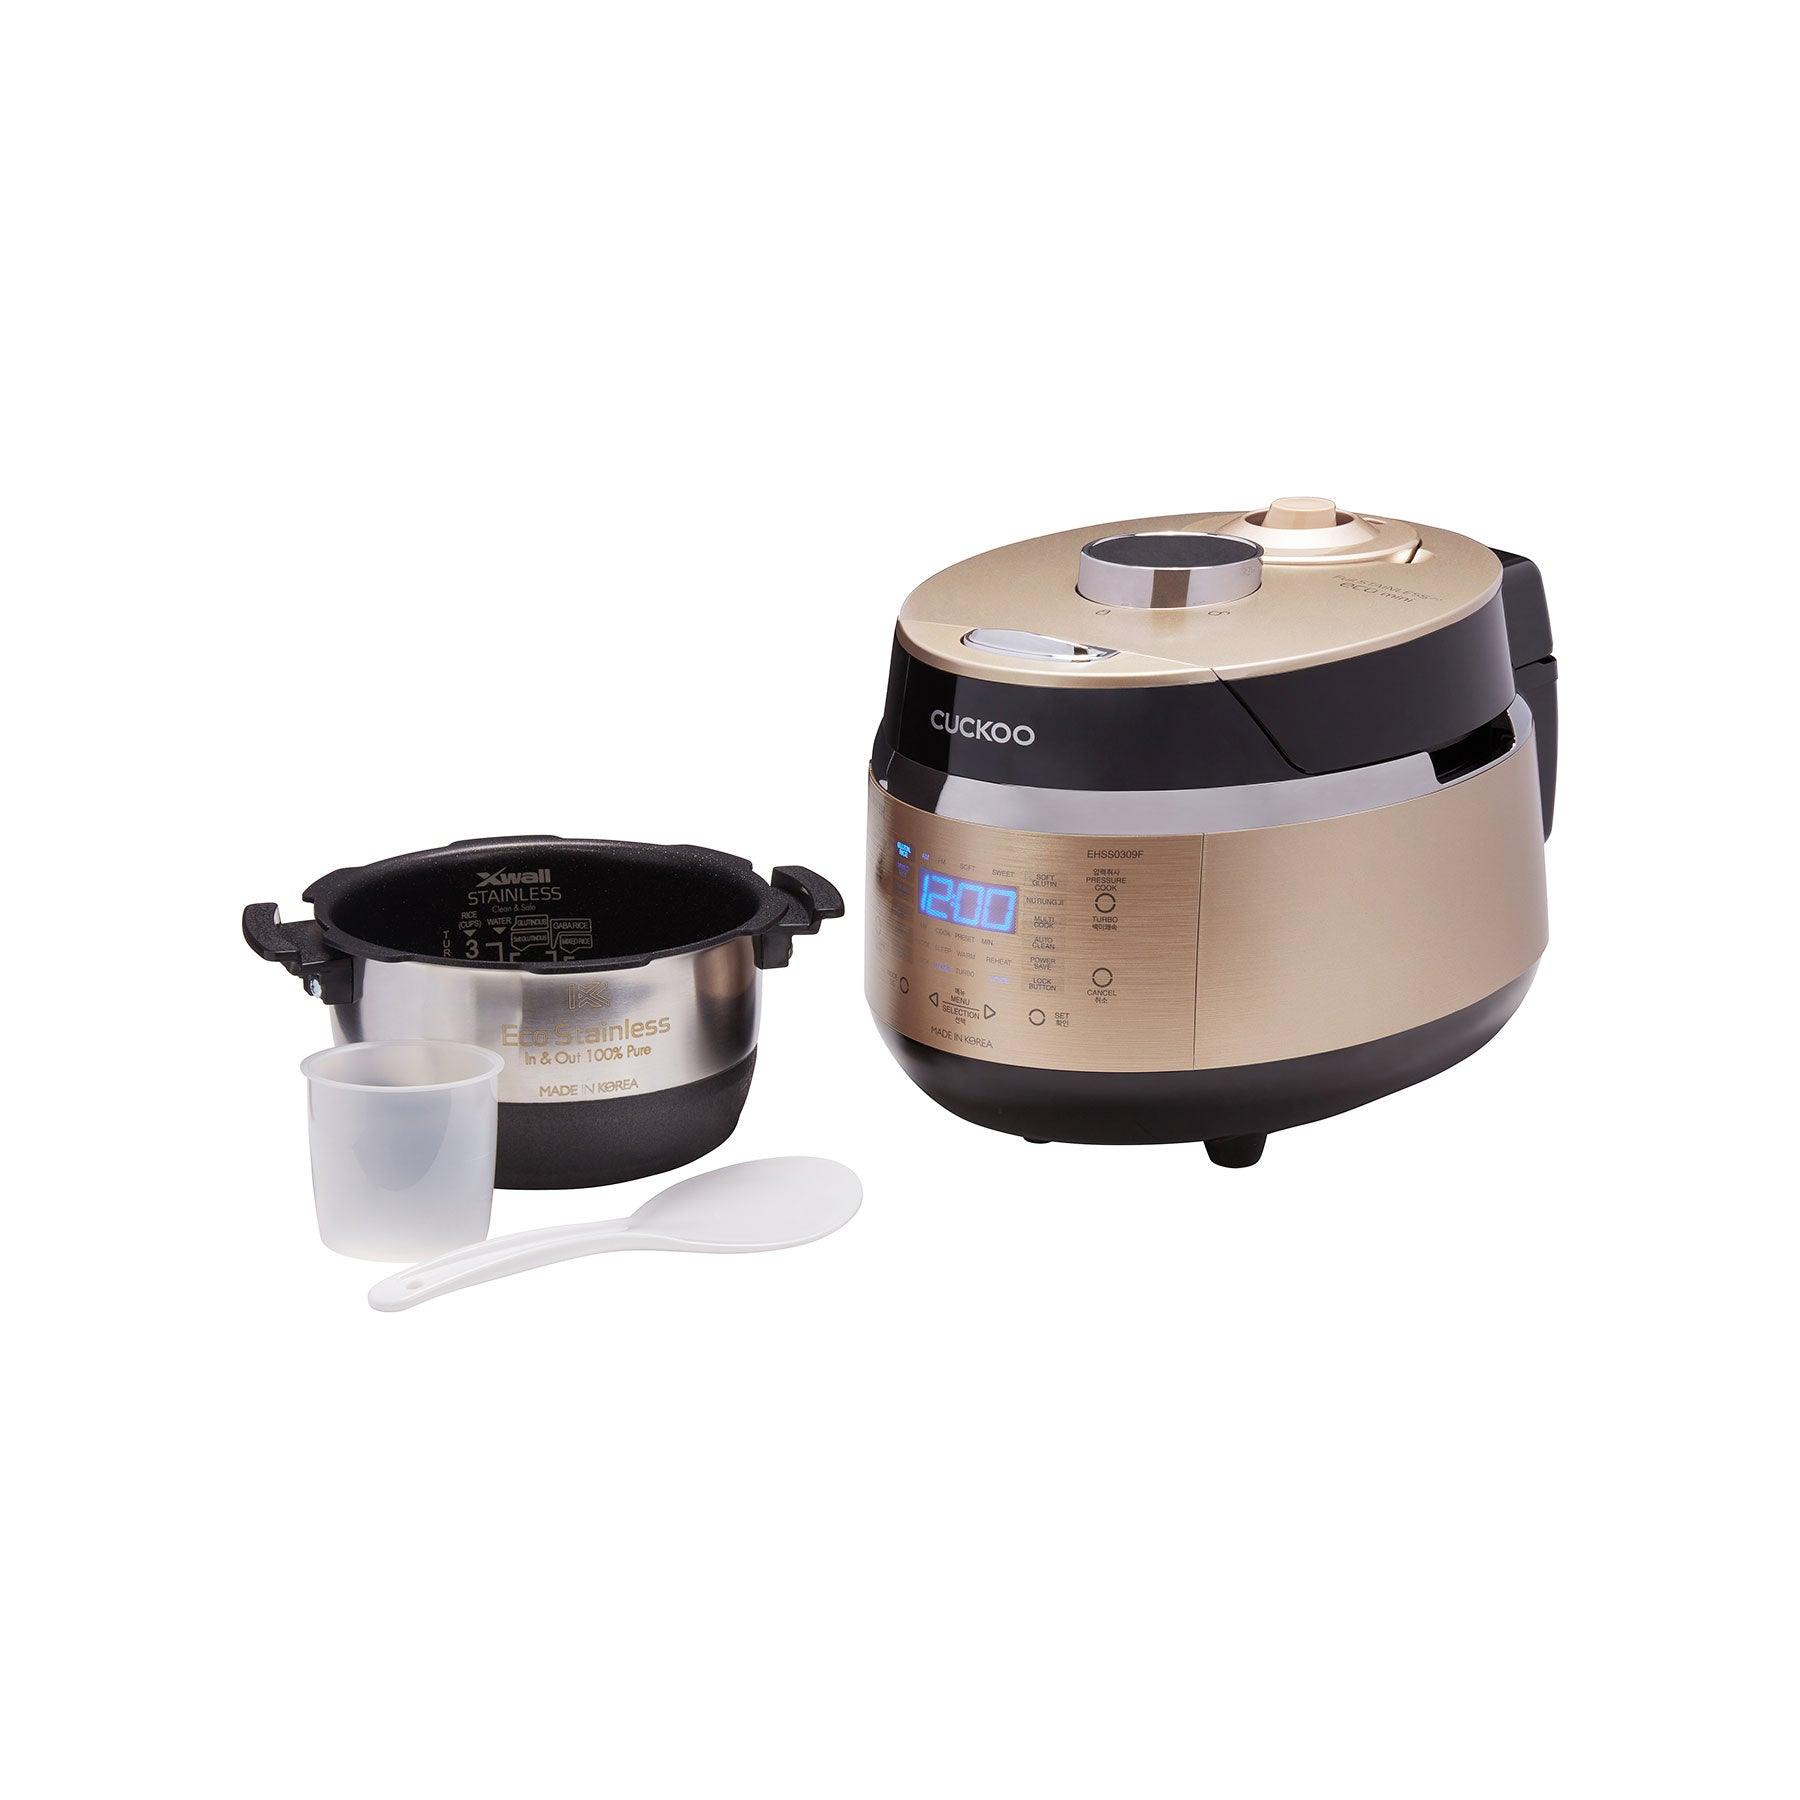 CUCKOO 10-Cup Twin Pressure Induction Rice Cooker & Warmer